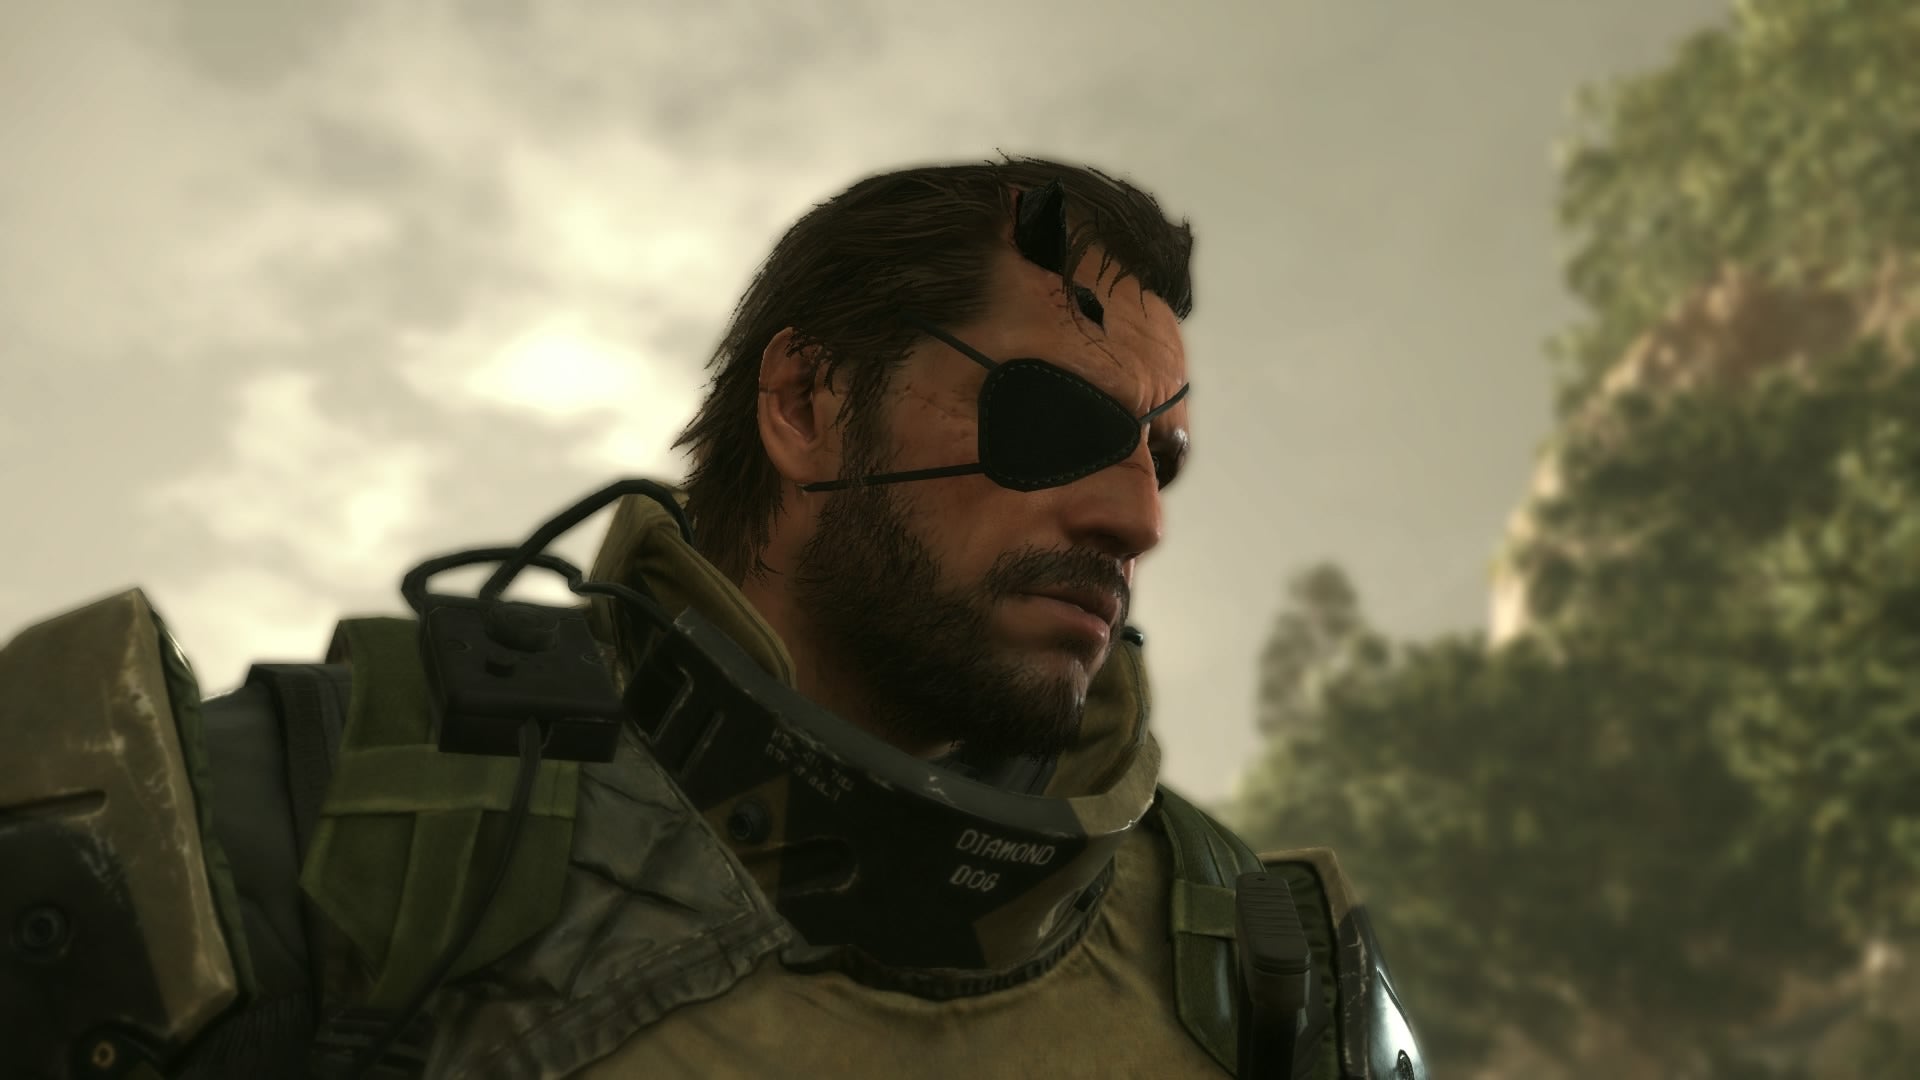 Image for Metal Gear Solid 5: The Phantom Pain Episode 44 - [Total Stealth] Pitch Dark